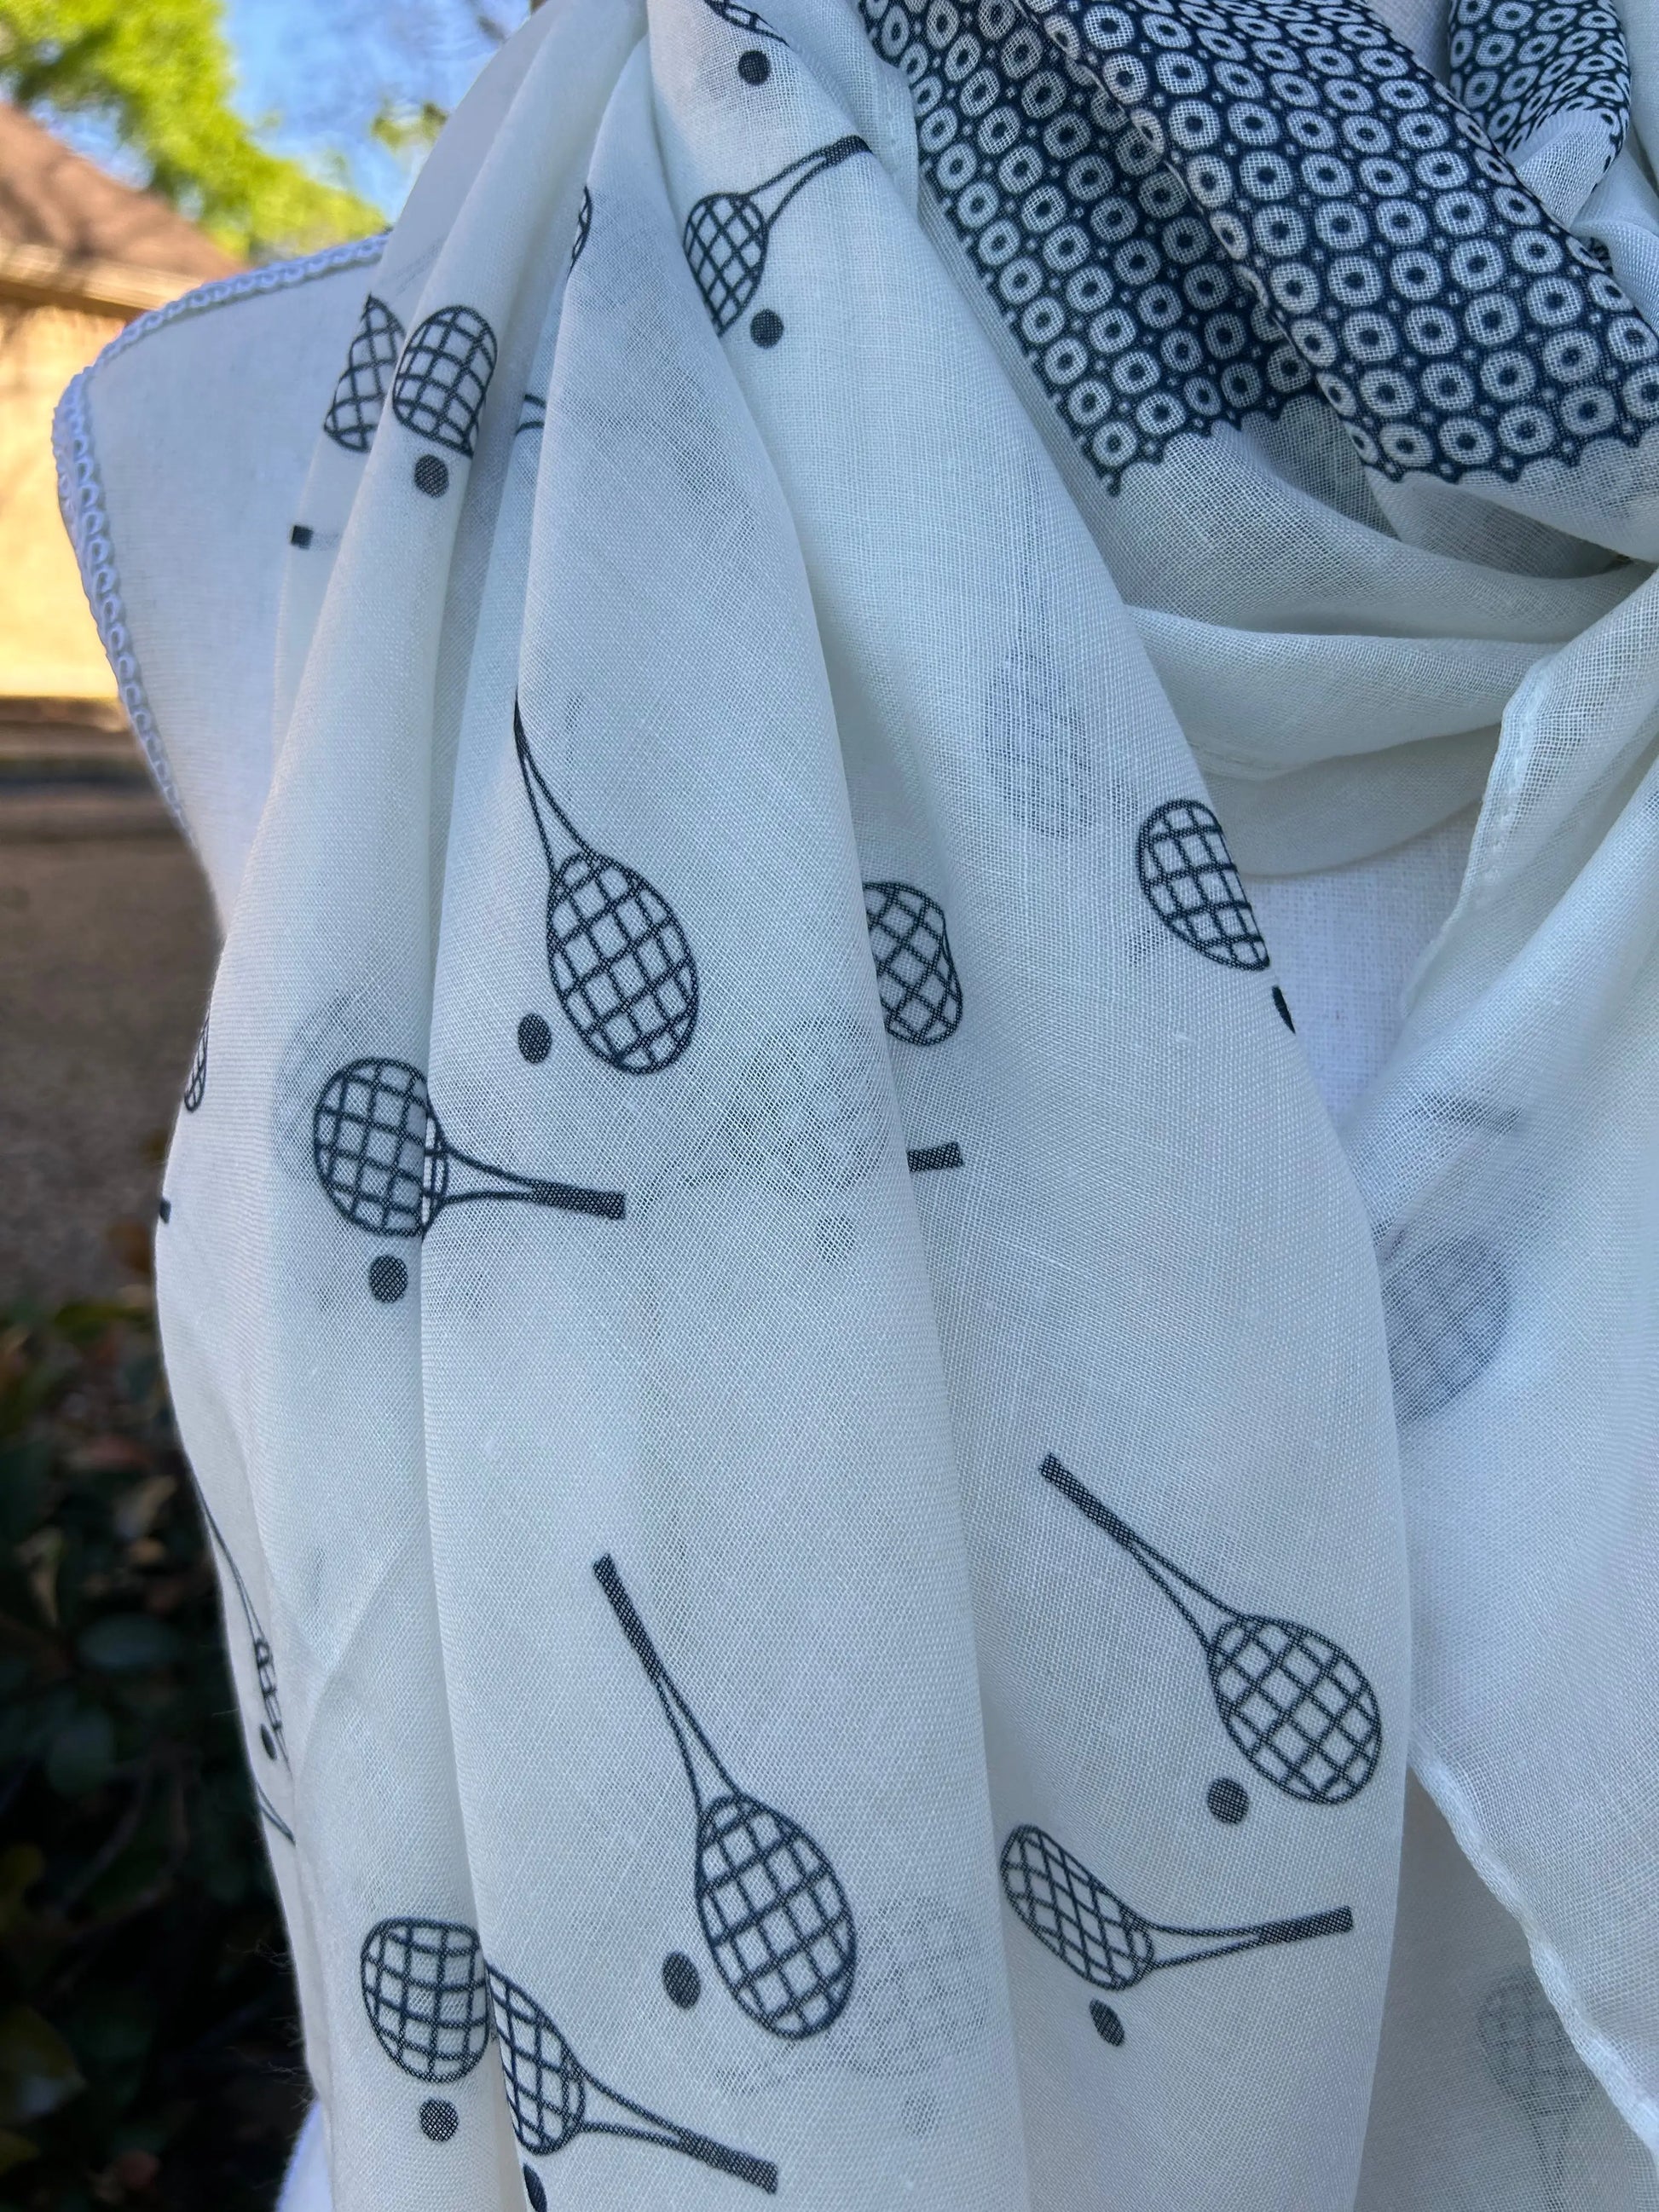 Protect yourself from the sun in style with our versatile Racquet Sun Scarf/Wrap. Stay cool and fashionable on and off the court. 